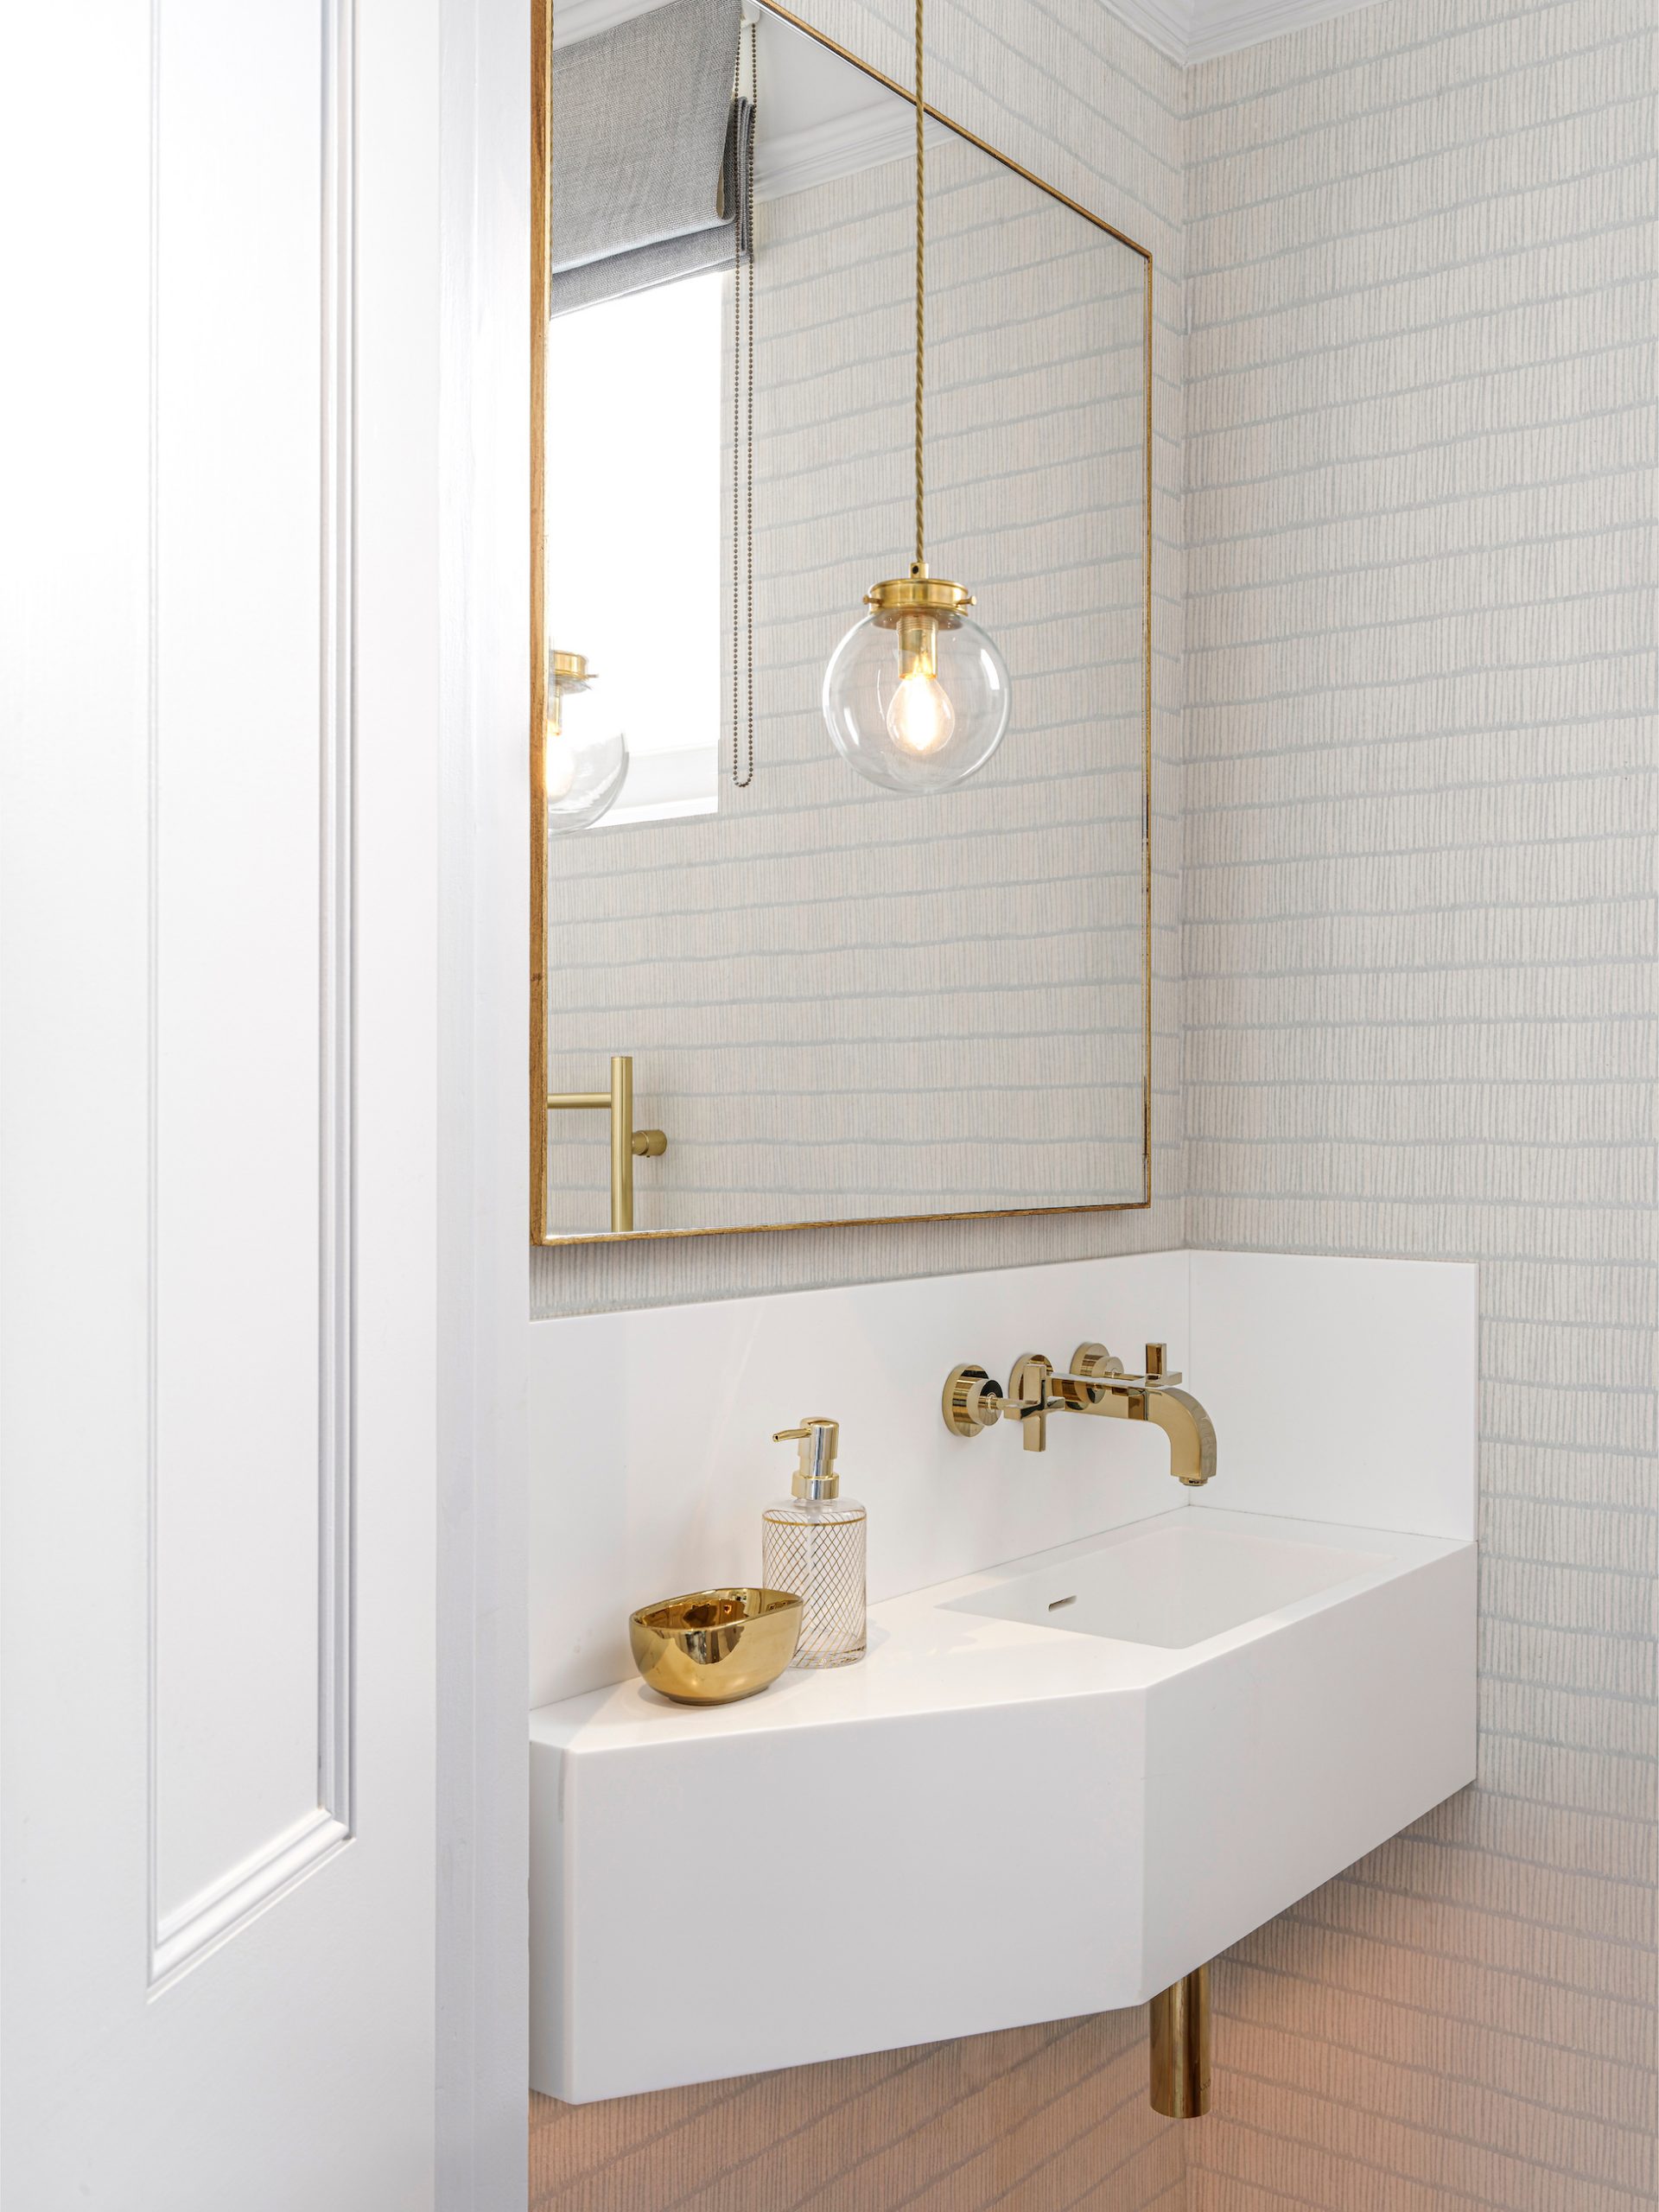 Victorian Townhouse - FF - WC with bespoke Corian vanity and gold sanitary ware